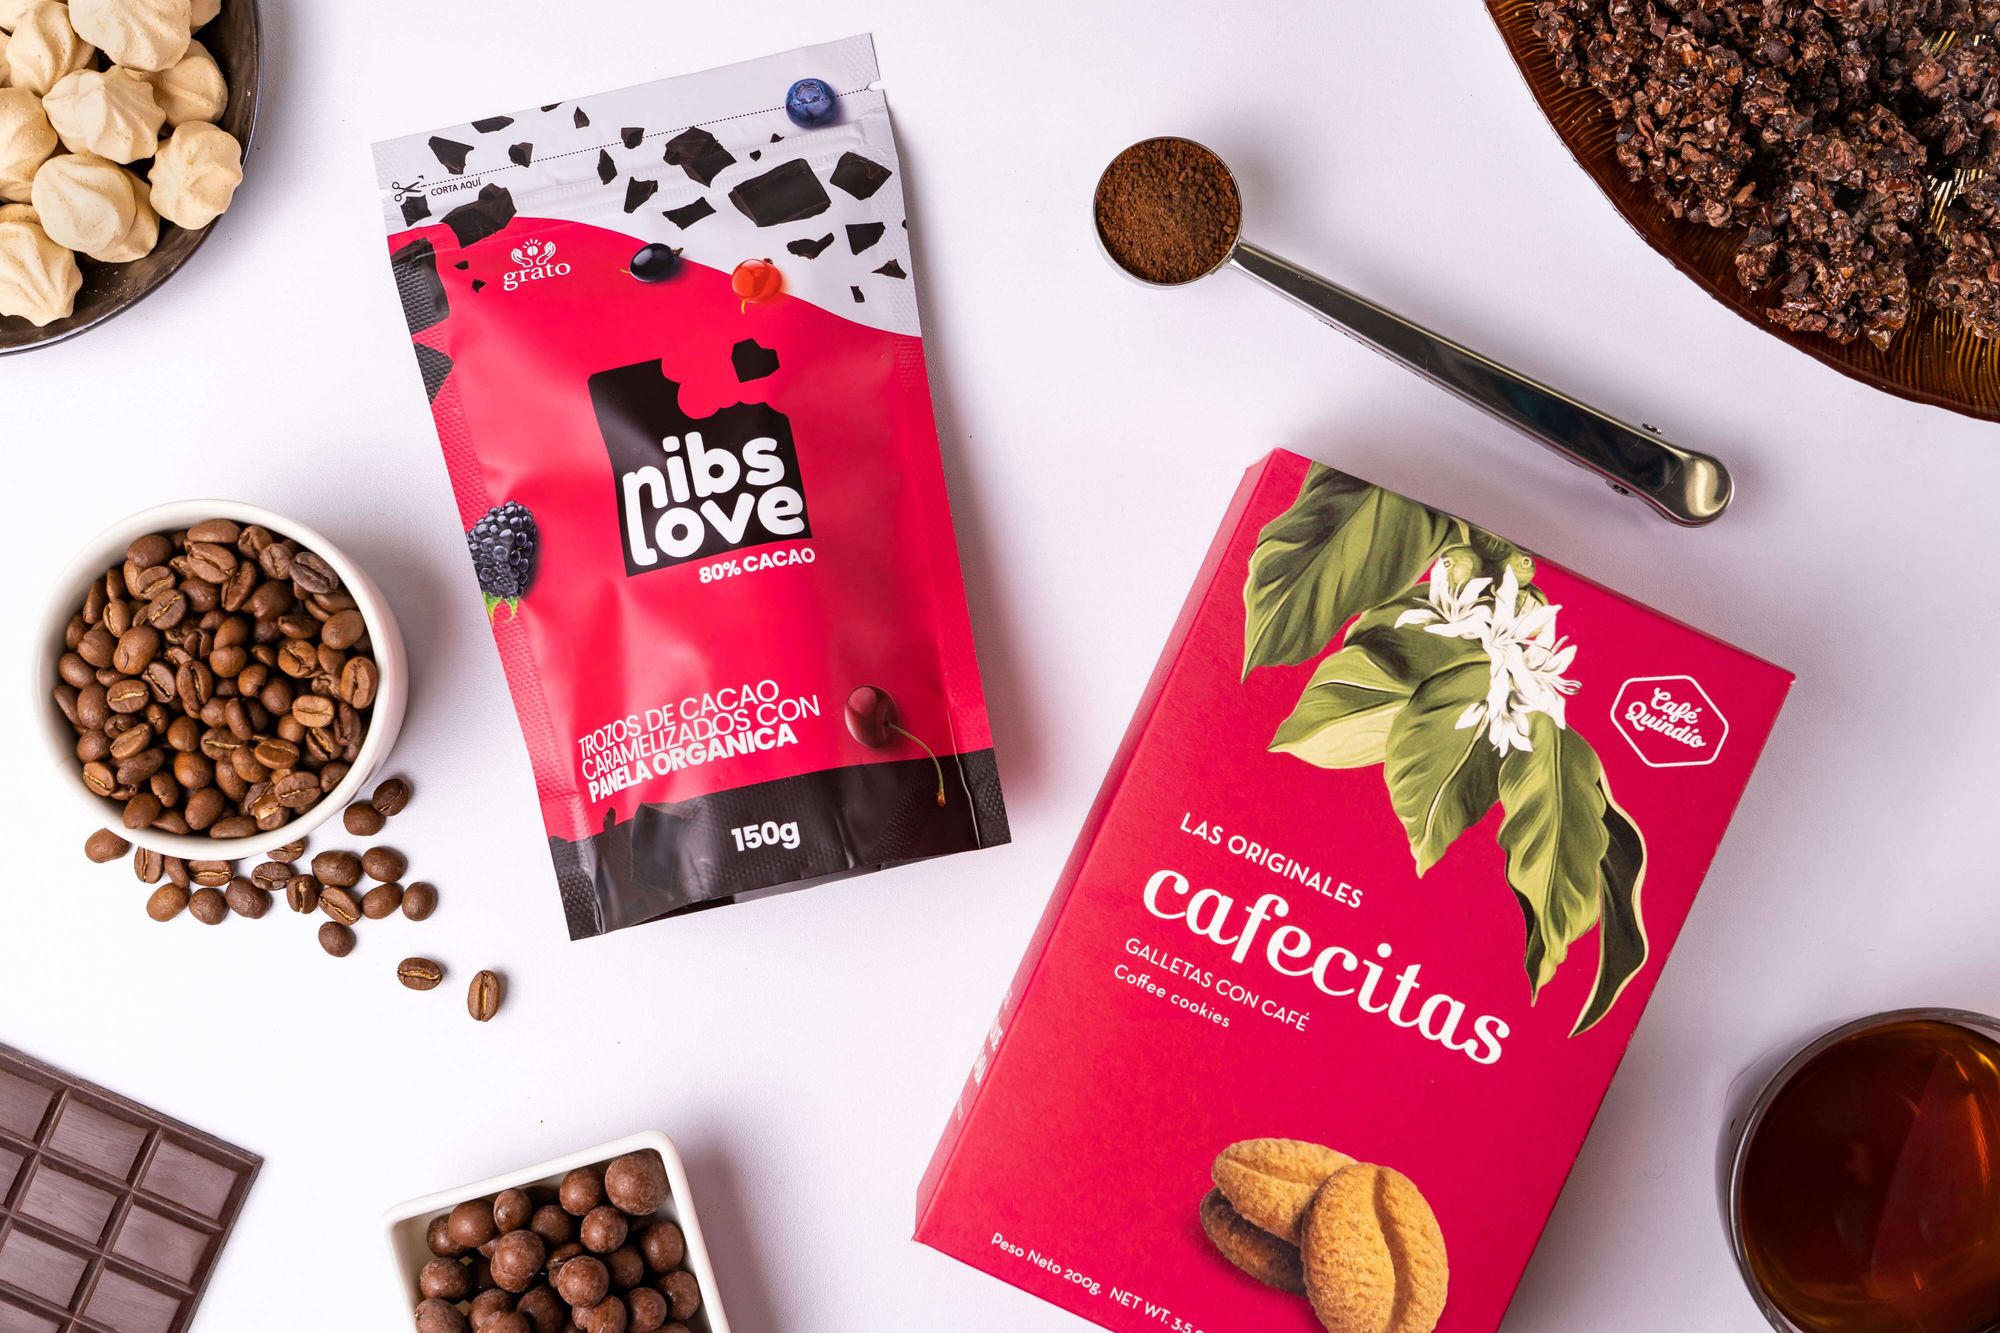 How this Colombian Coffee Brand Built a Loyal Following, photo of a new product from la tienda del cafe cookies and cacao nibs 